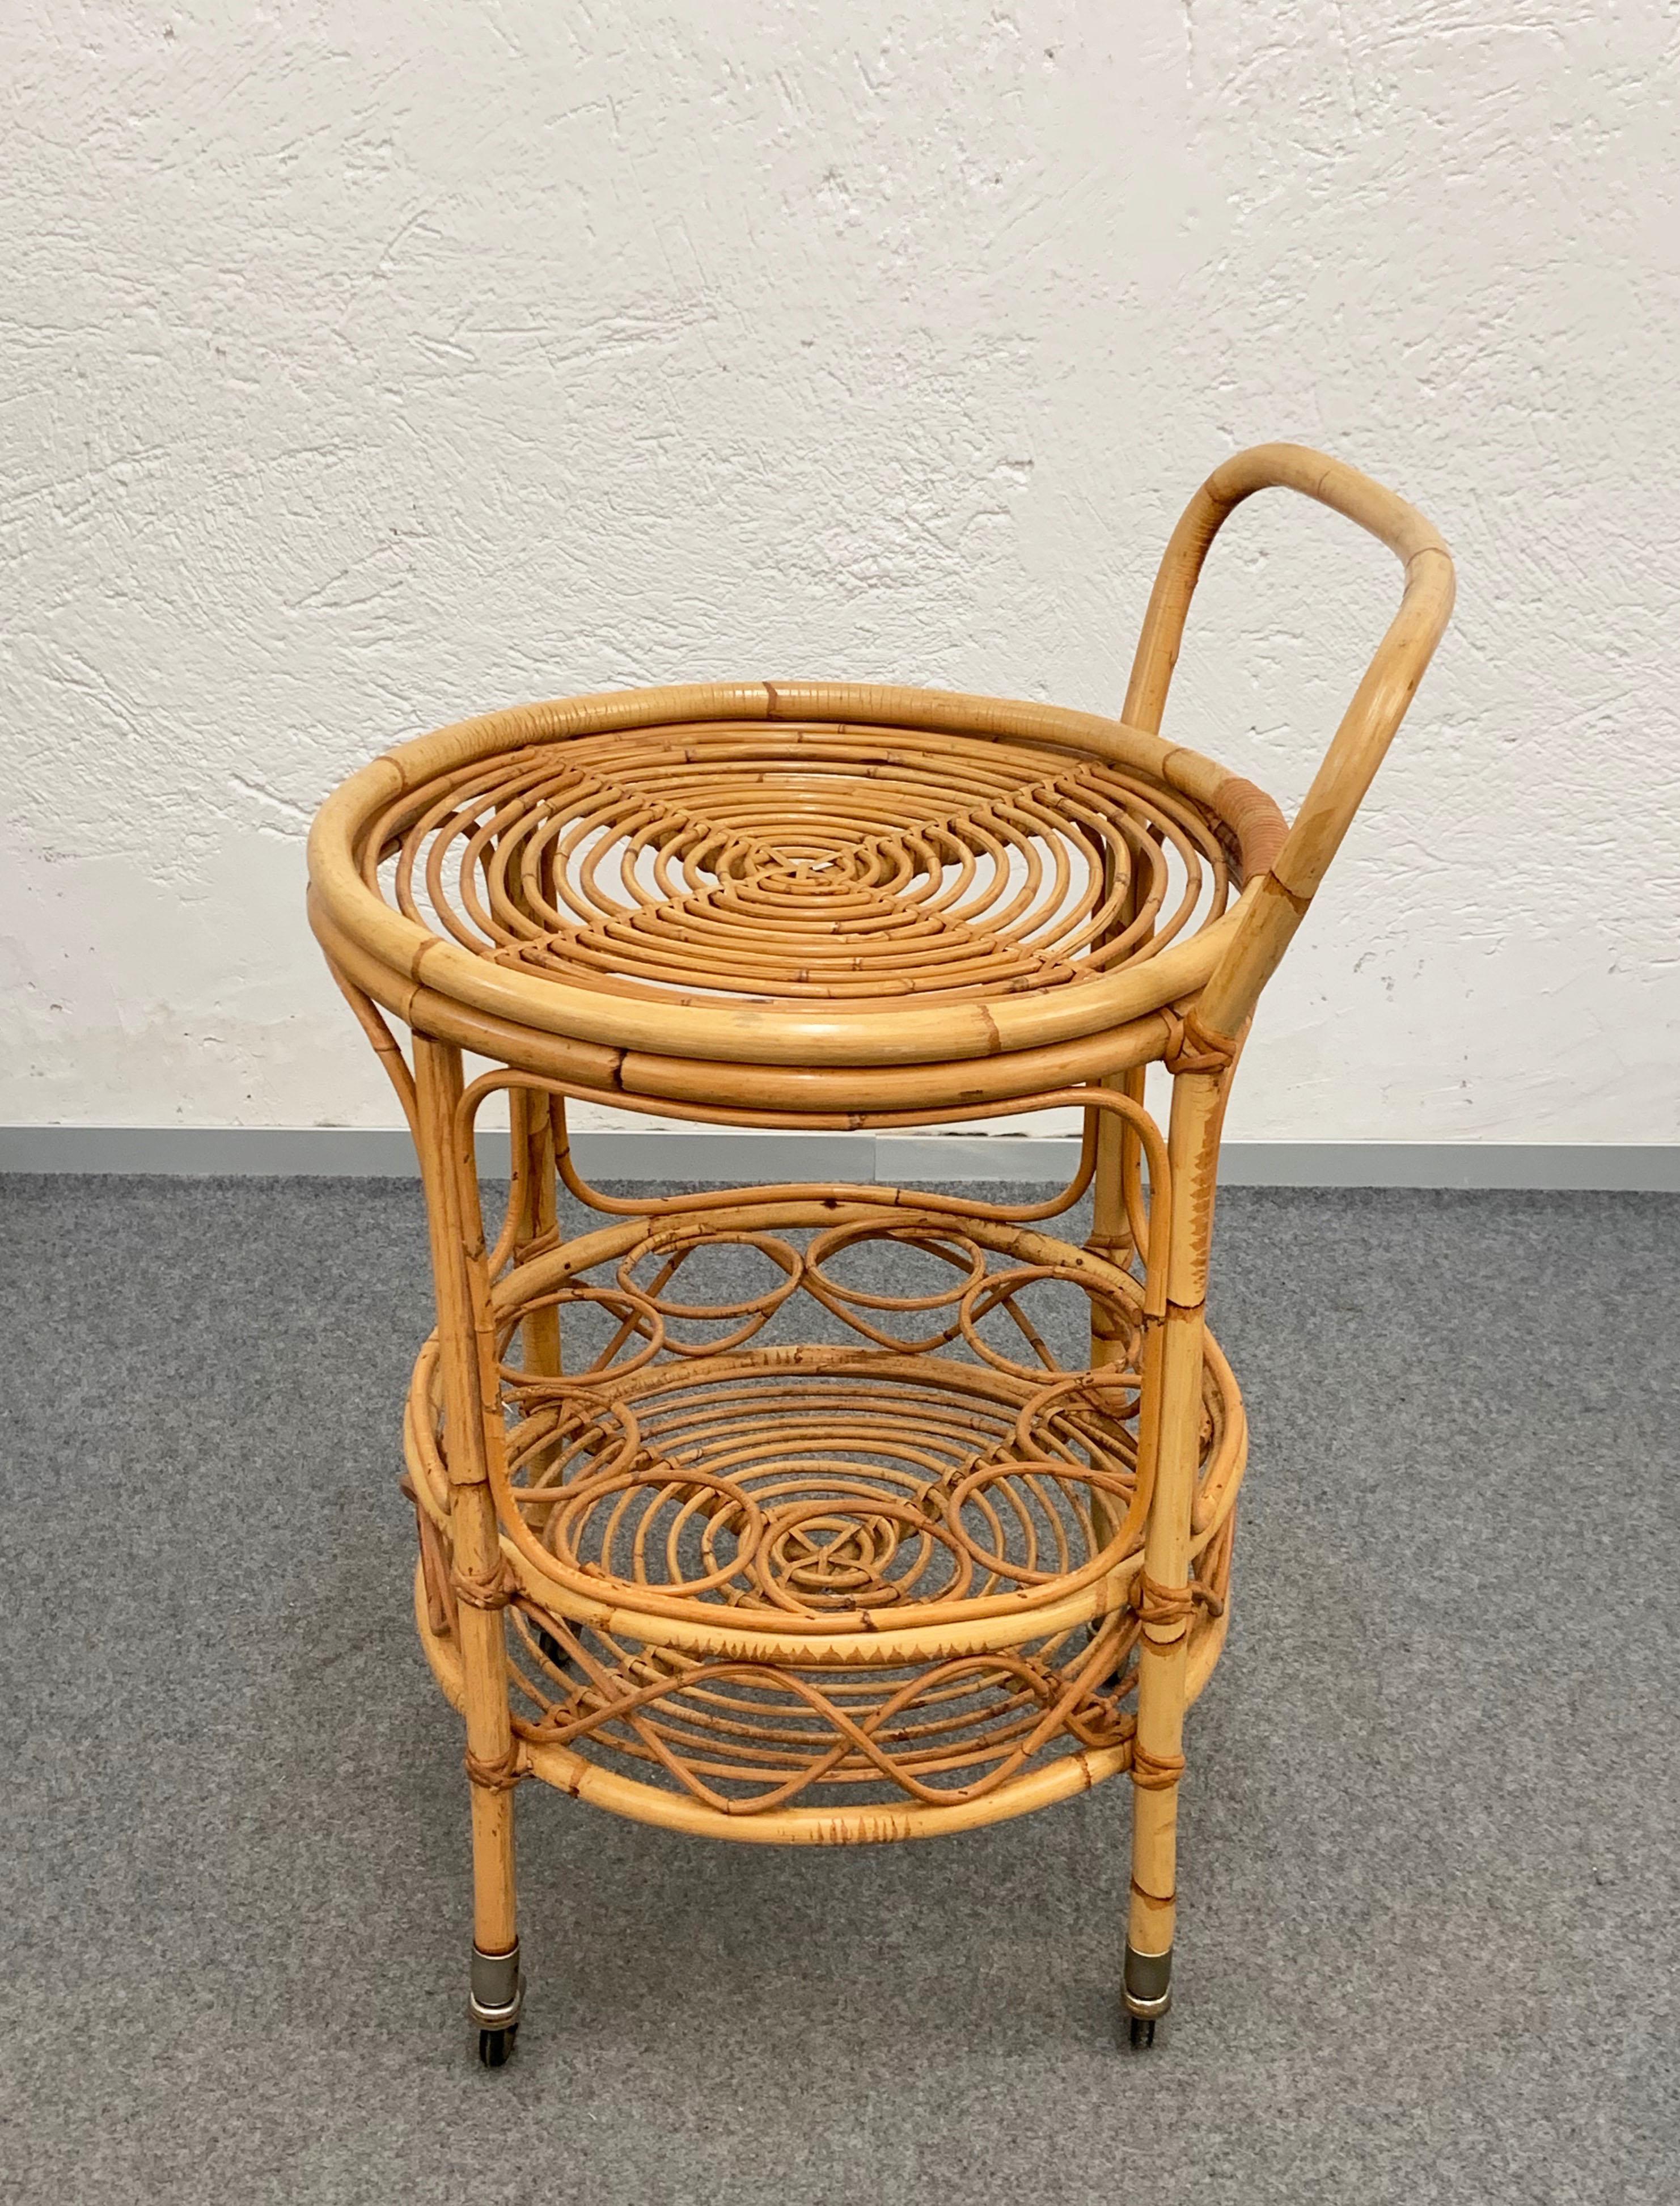 Fabulous midcentury bamboo and rattan bar cart in perfect conditions. This item was produced in Italy during 1960s.

It is made in bamboo with rattan finishes, it has two levels and four small wheels at the bottom. The lower level has a bottle